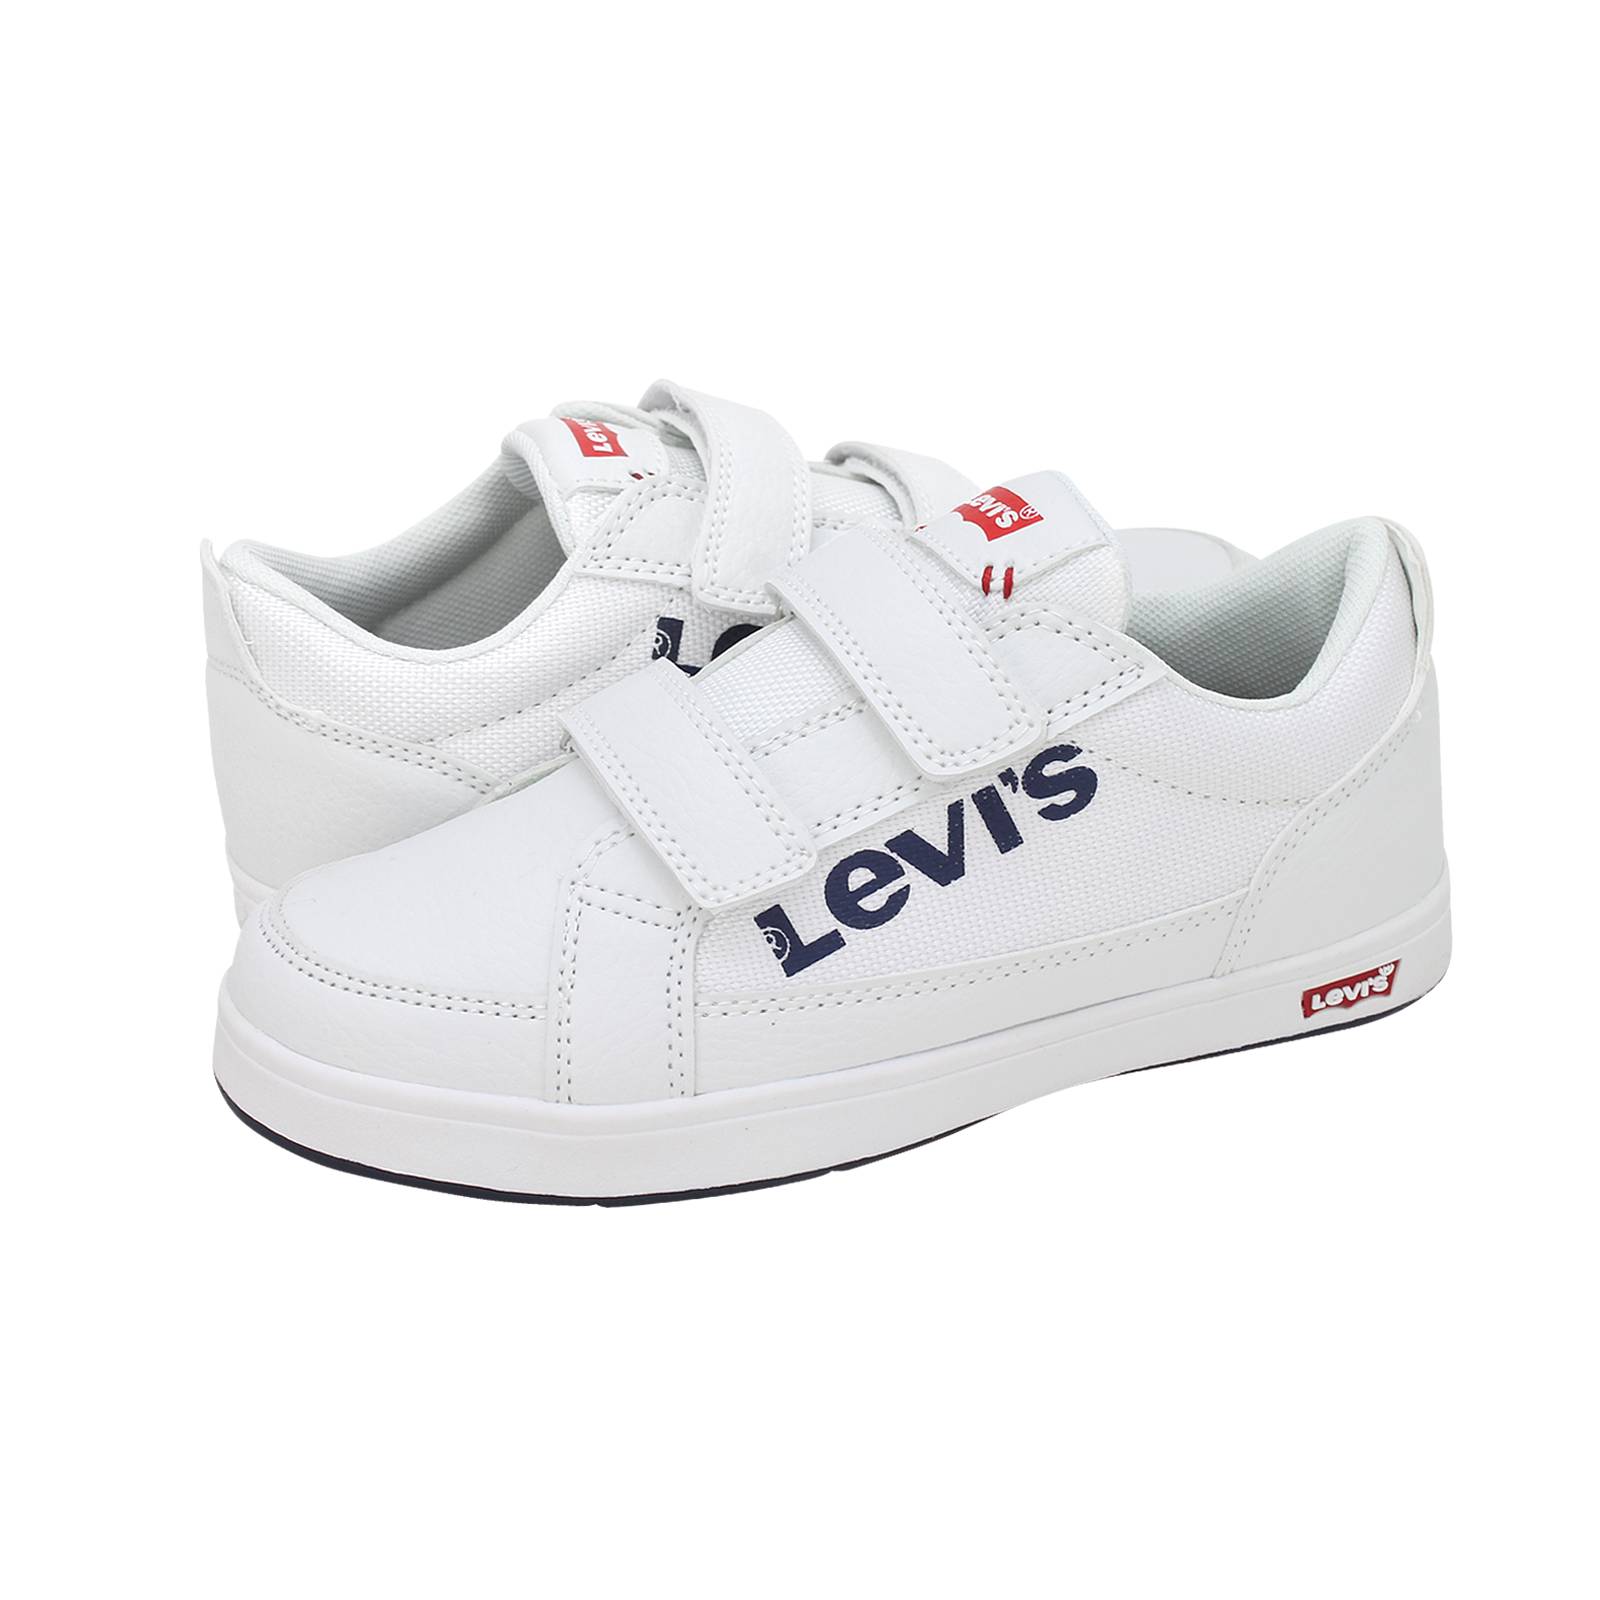 Denver 2 Velcro - Levi's Casual kids' shoes made of synthetic leather and  fabric - Gianna Kazakou Online